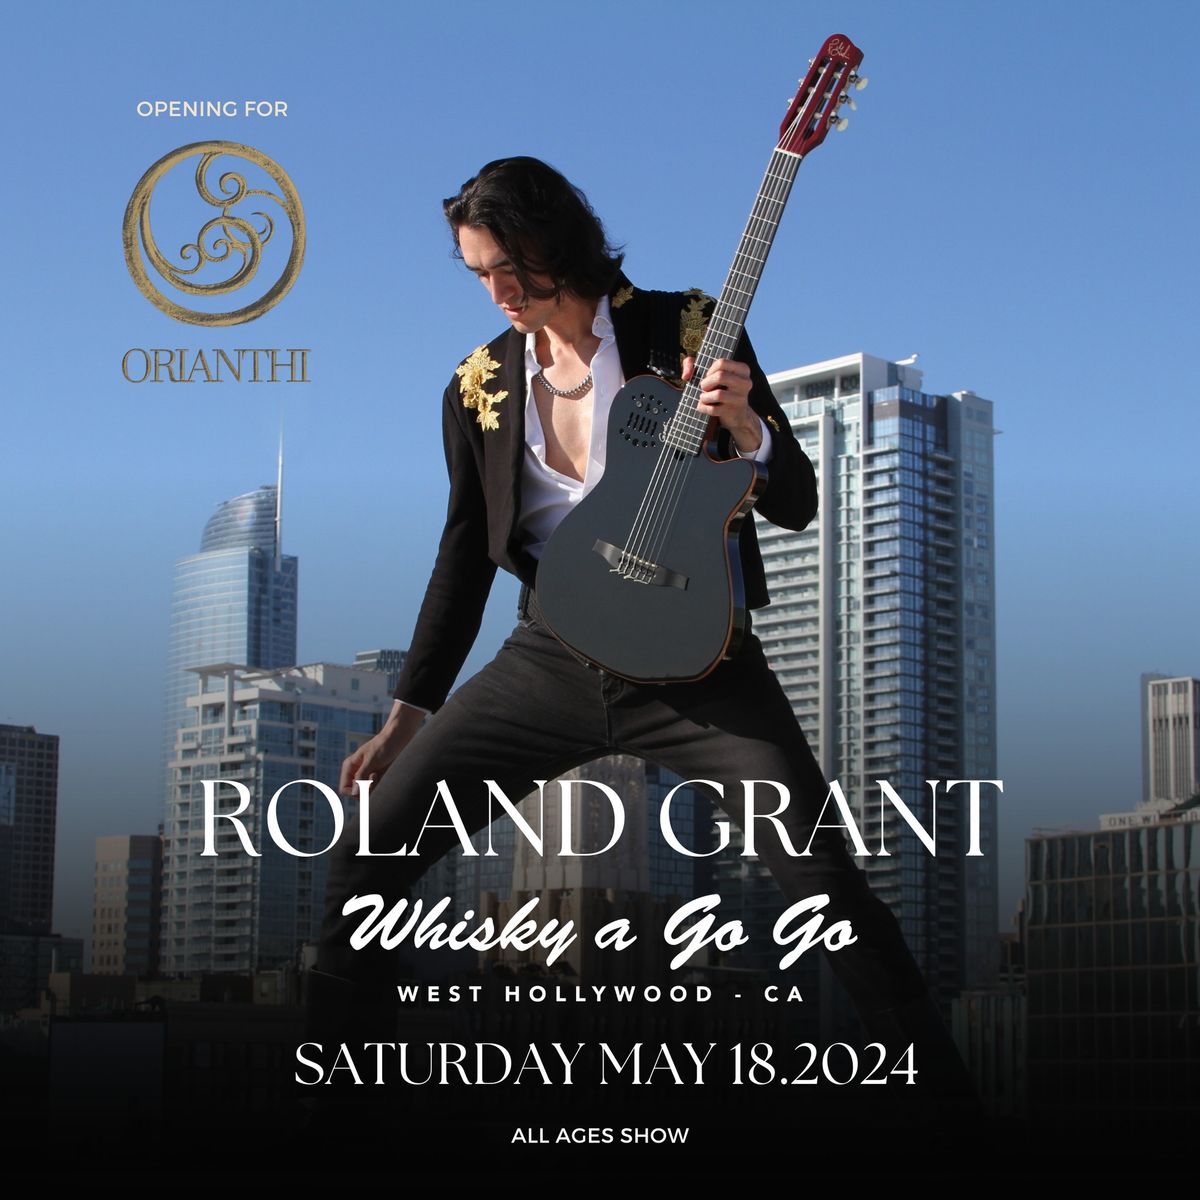 Roland Grant - Whisky a Go Go West Hollywood - Opening for Orianthi